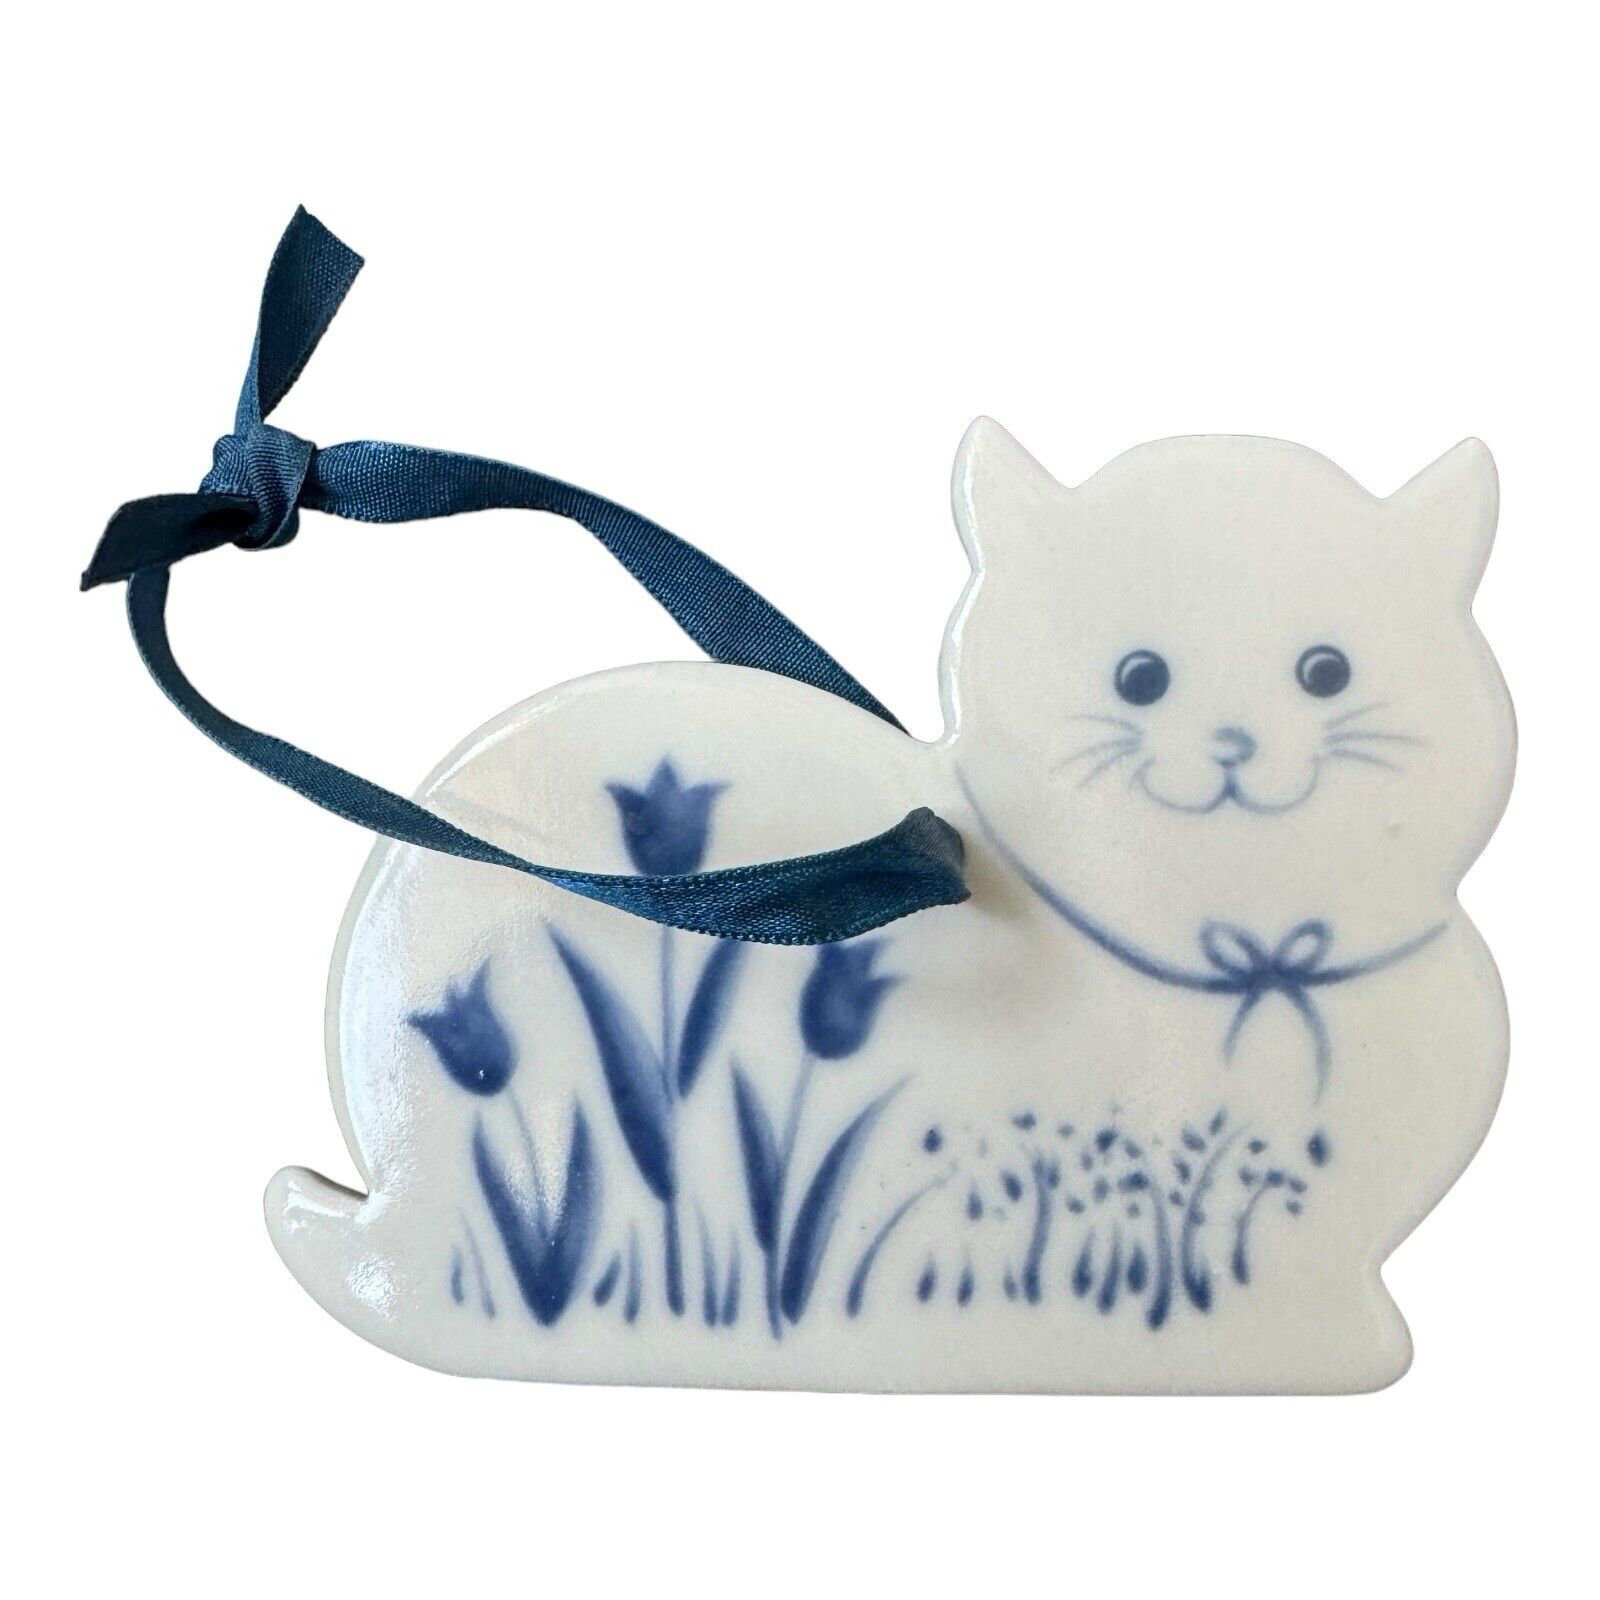 Vintage Russ Berrie Cat Figurine - Blue and White Ceramic with Ribbon 